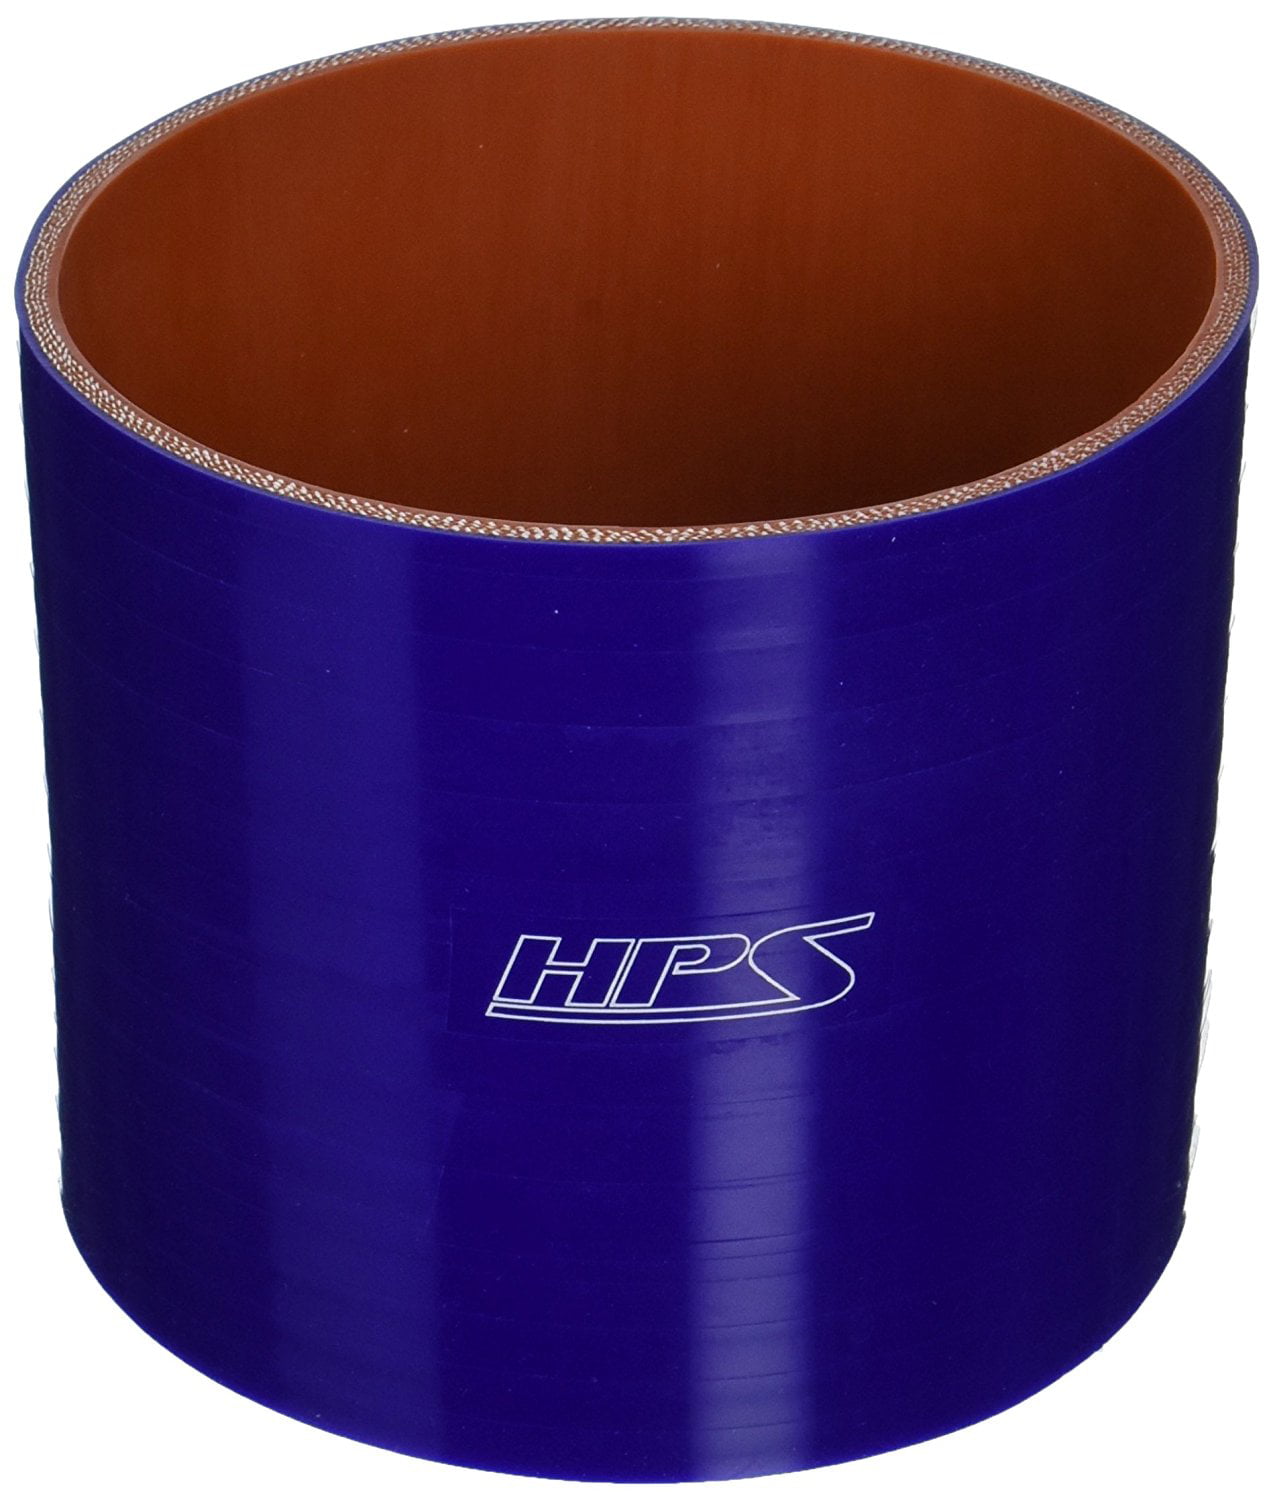 3 Length HPS HTSC-500-BLUE Silicone High Temperature 4-ply Reinforced Straight Coupler Hose Blue 65 PSI Maximum Pressure 5 ID 